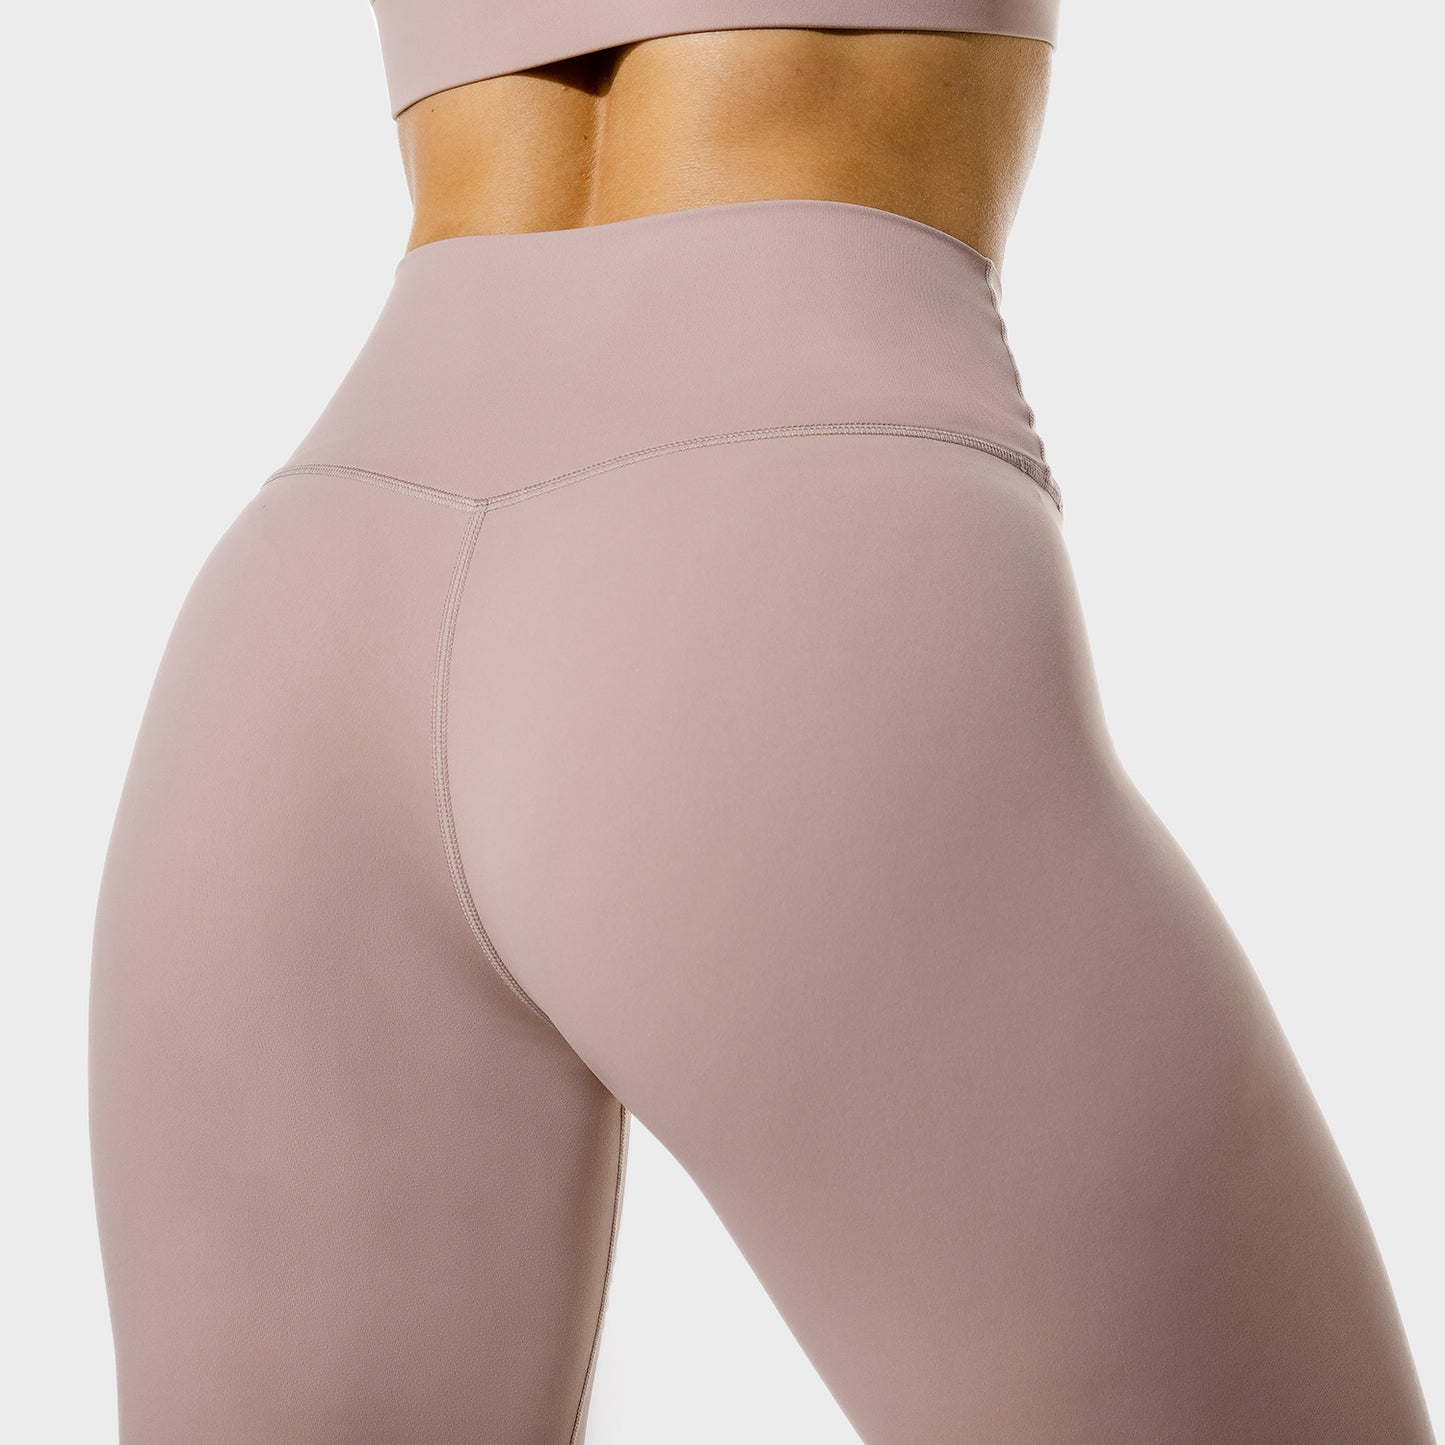 squatwolf-workout-clothes-womens-fitness-7-8-leggings-pink-gym-leggings-for-women